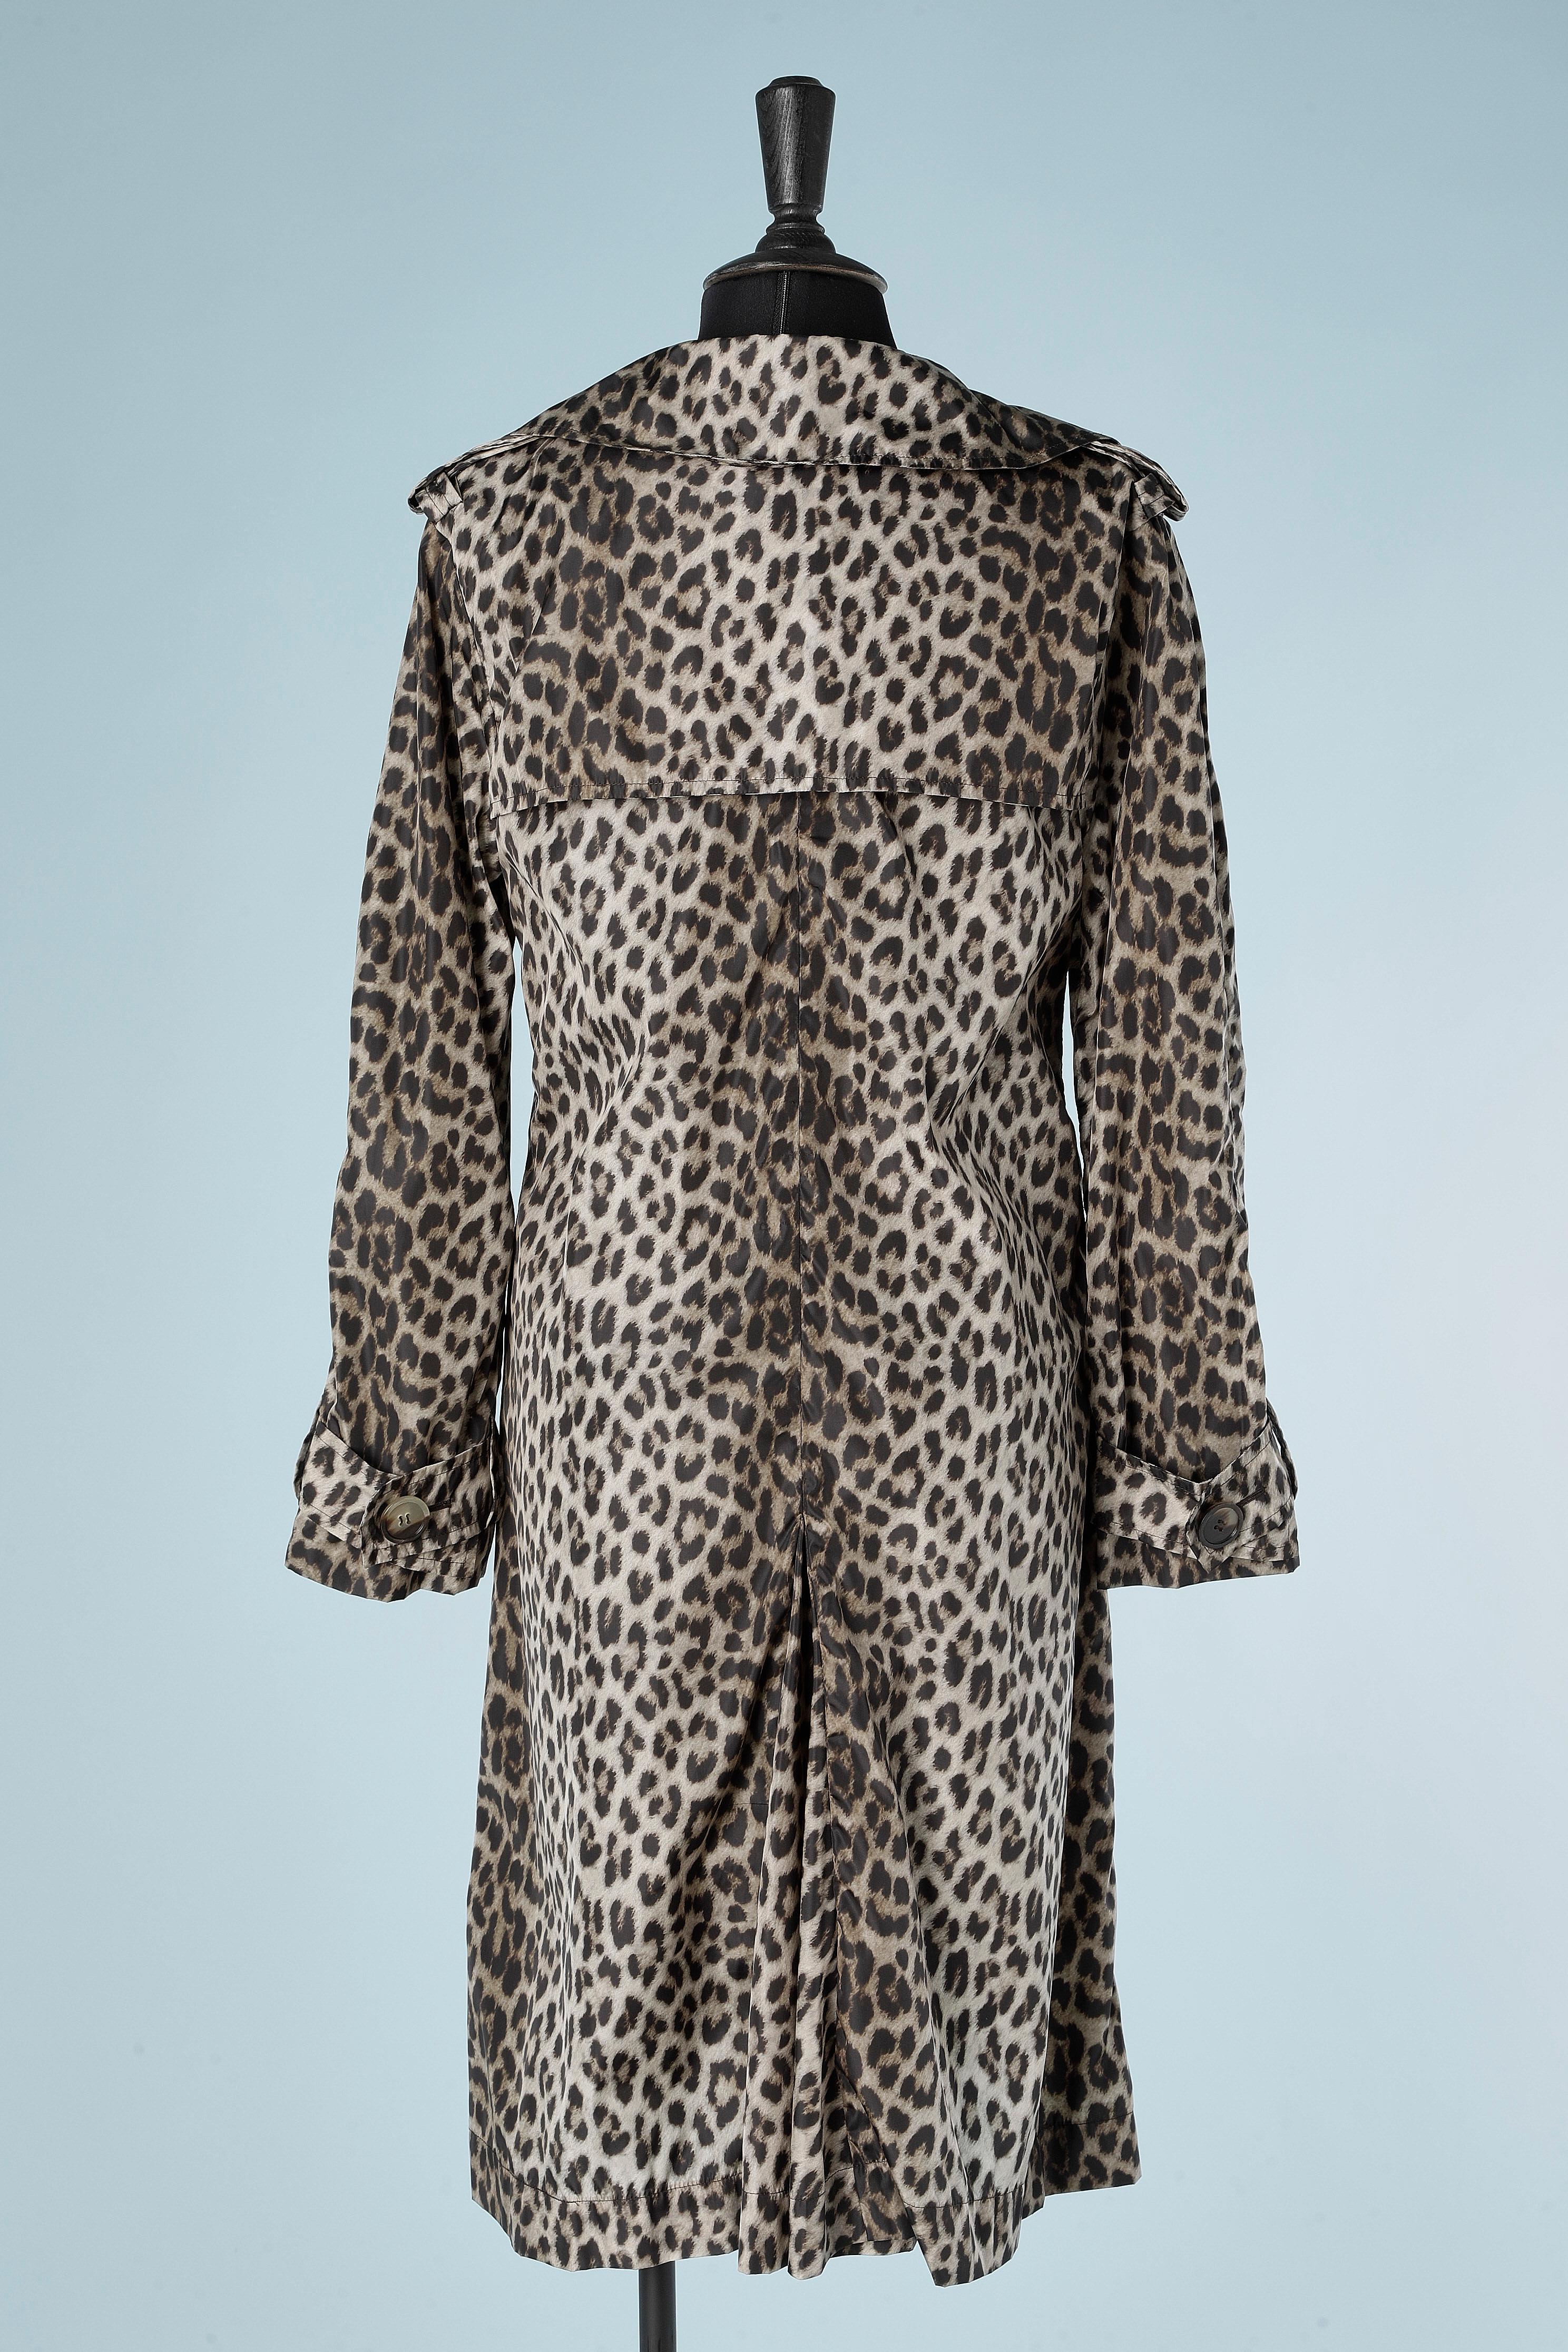 Nylon leopard printed double-breasted trench-coat Lanvin by Alber Elbaz 2010 For Sale 2